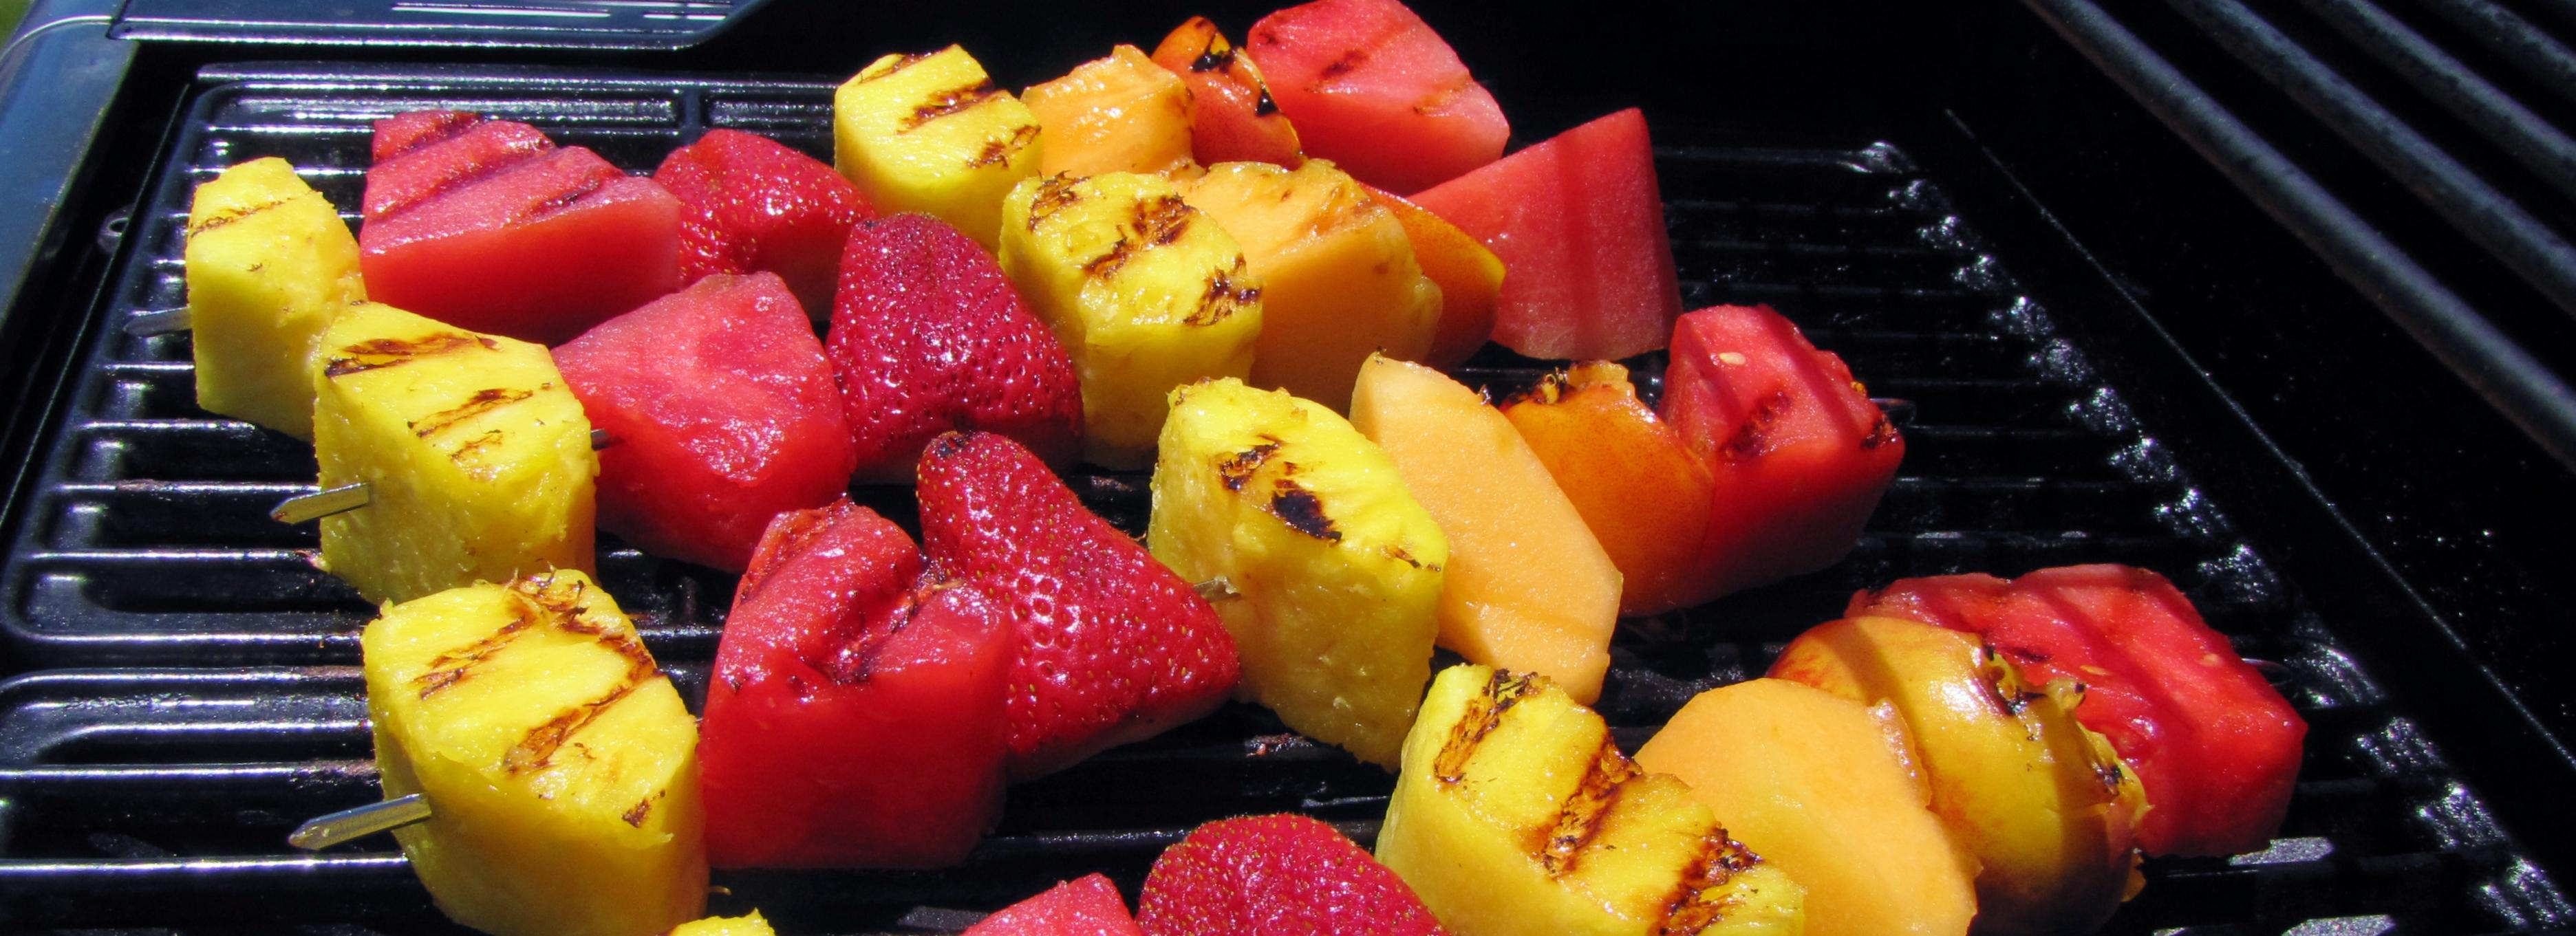 BBQ 101 Grilling Veggies and Fruits